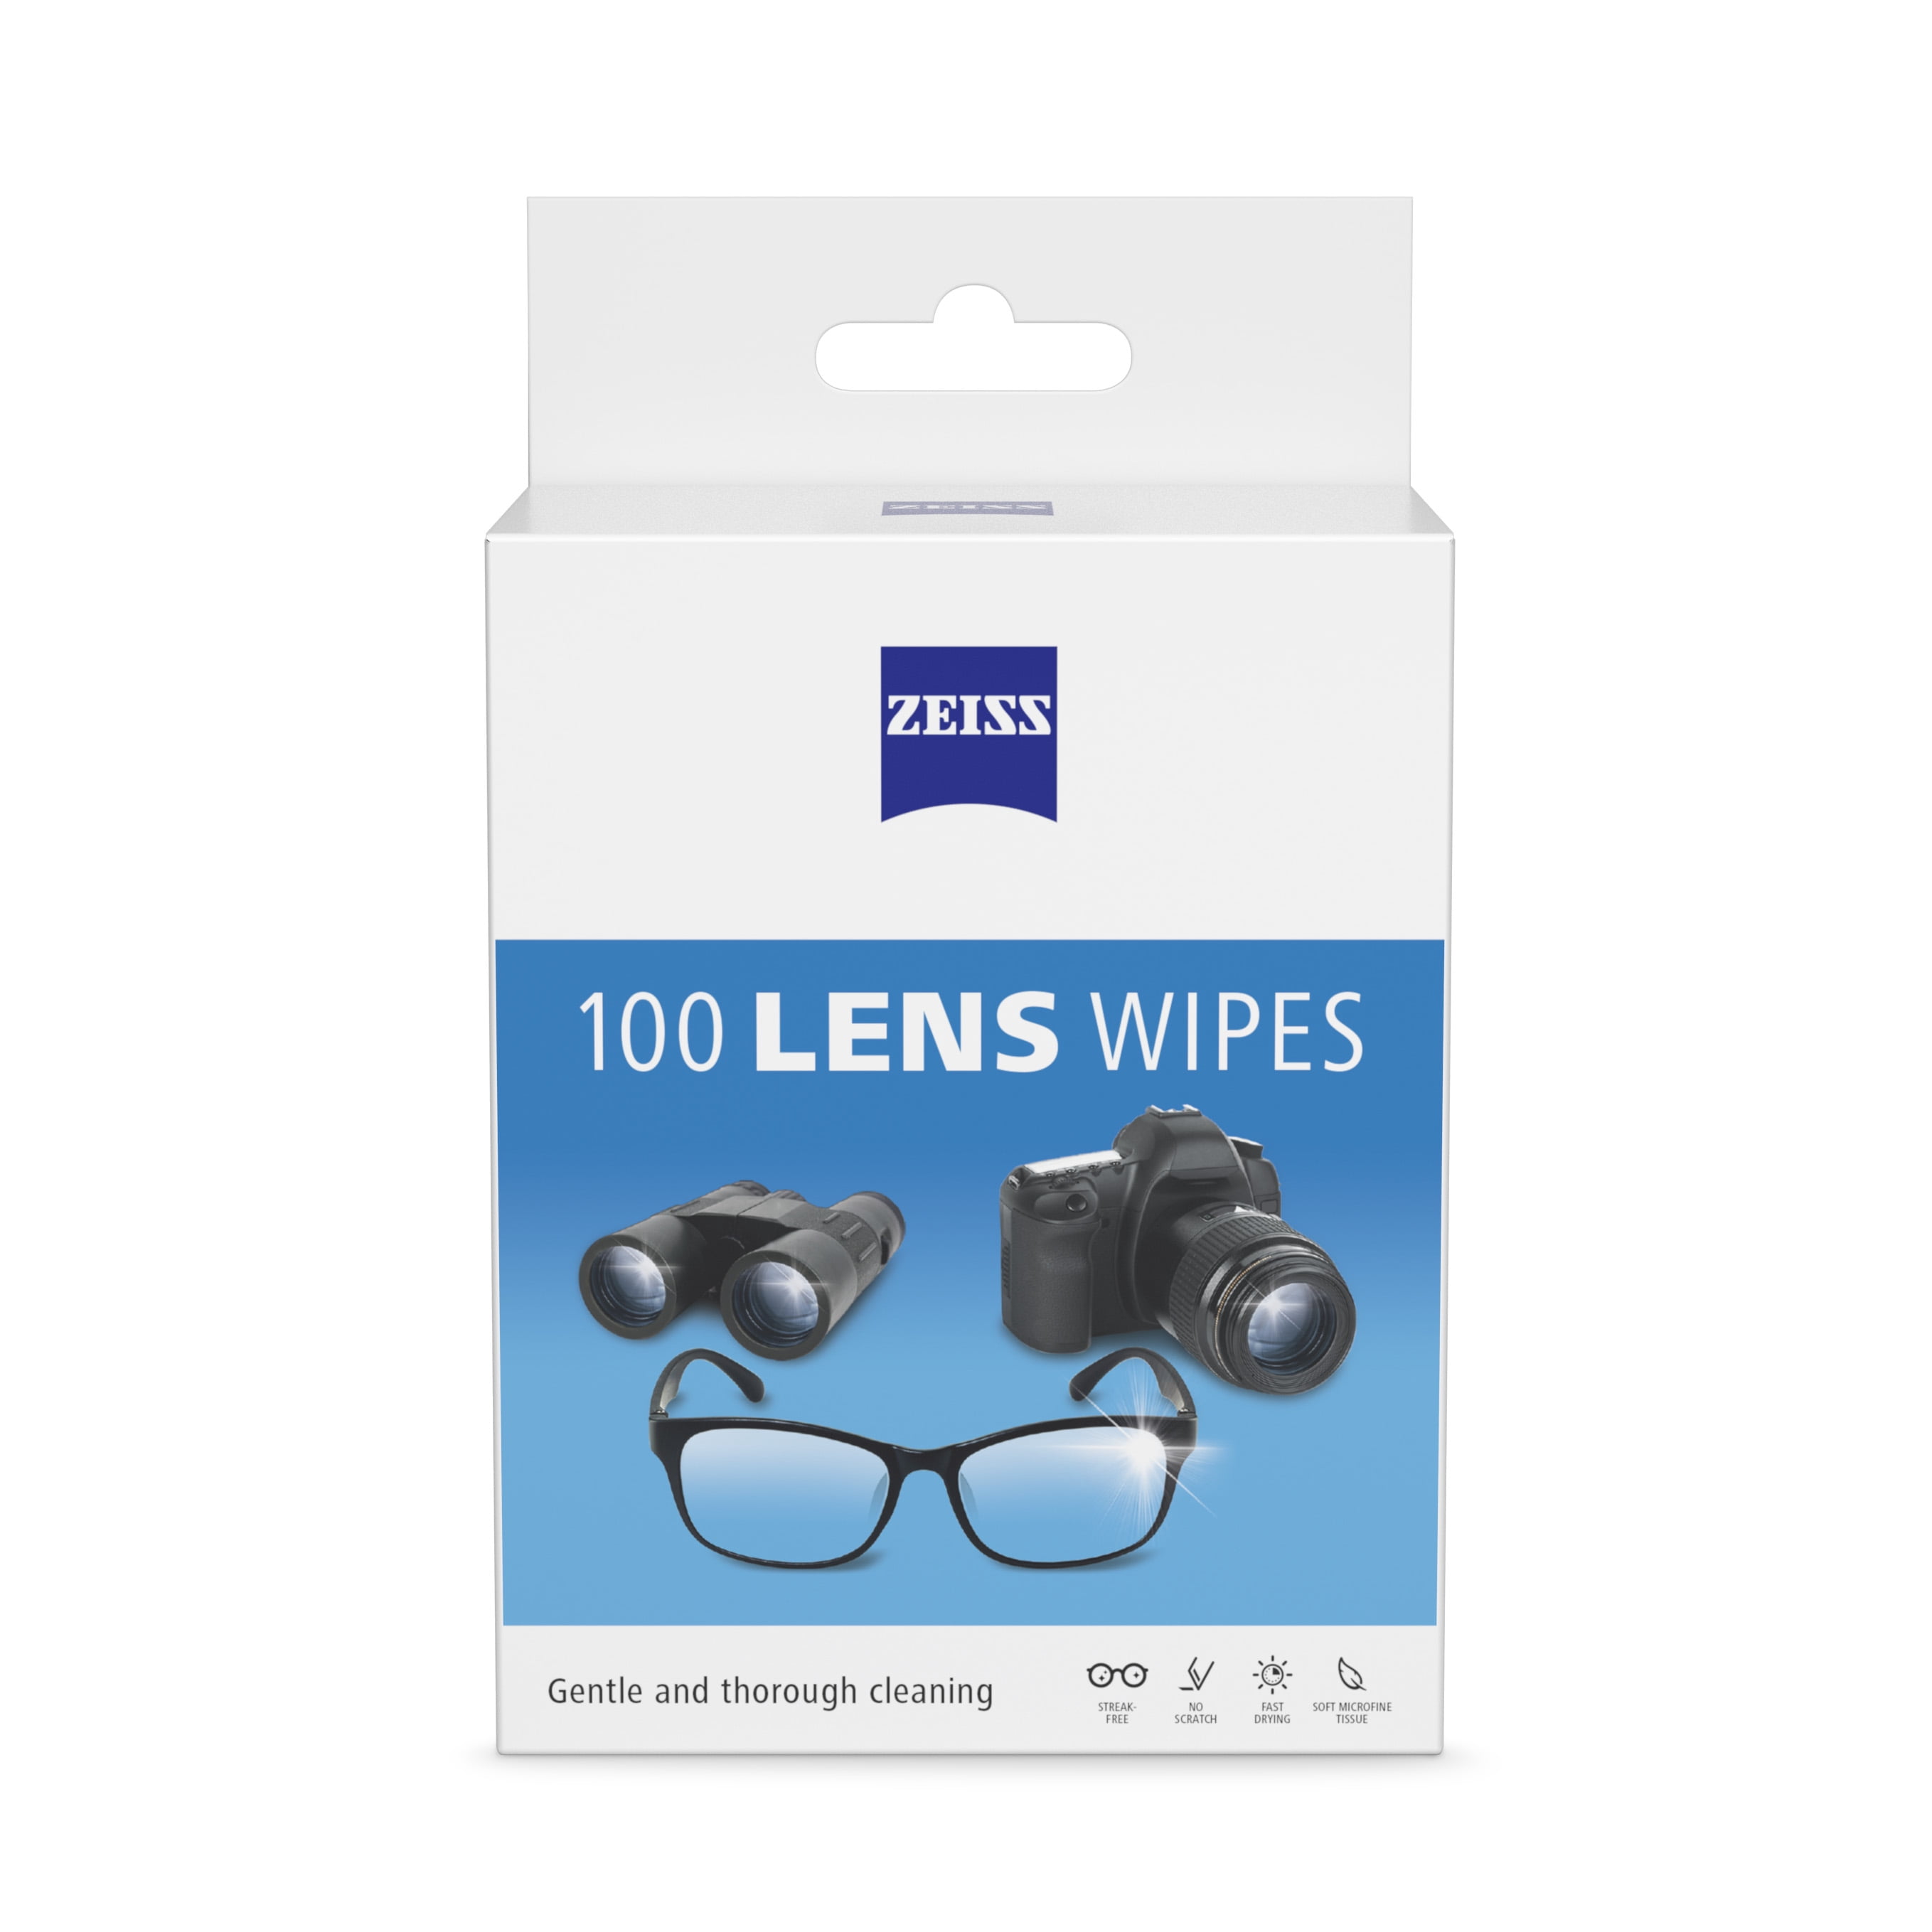  Eyeglass Cleaner Lens Wipes - 600 Pre-Moistened Individual  Wrapped Packets in Hangable Box for Wall, Glasses Cleaner Wipe Safely  Cleans Eye Glasses, Sunglasses, Screens & Electronics